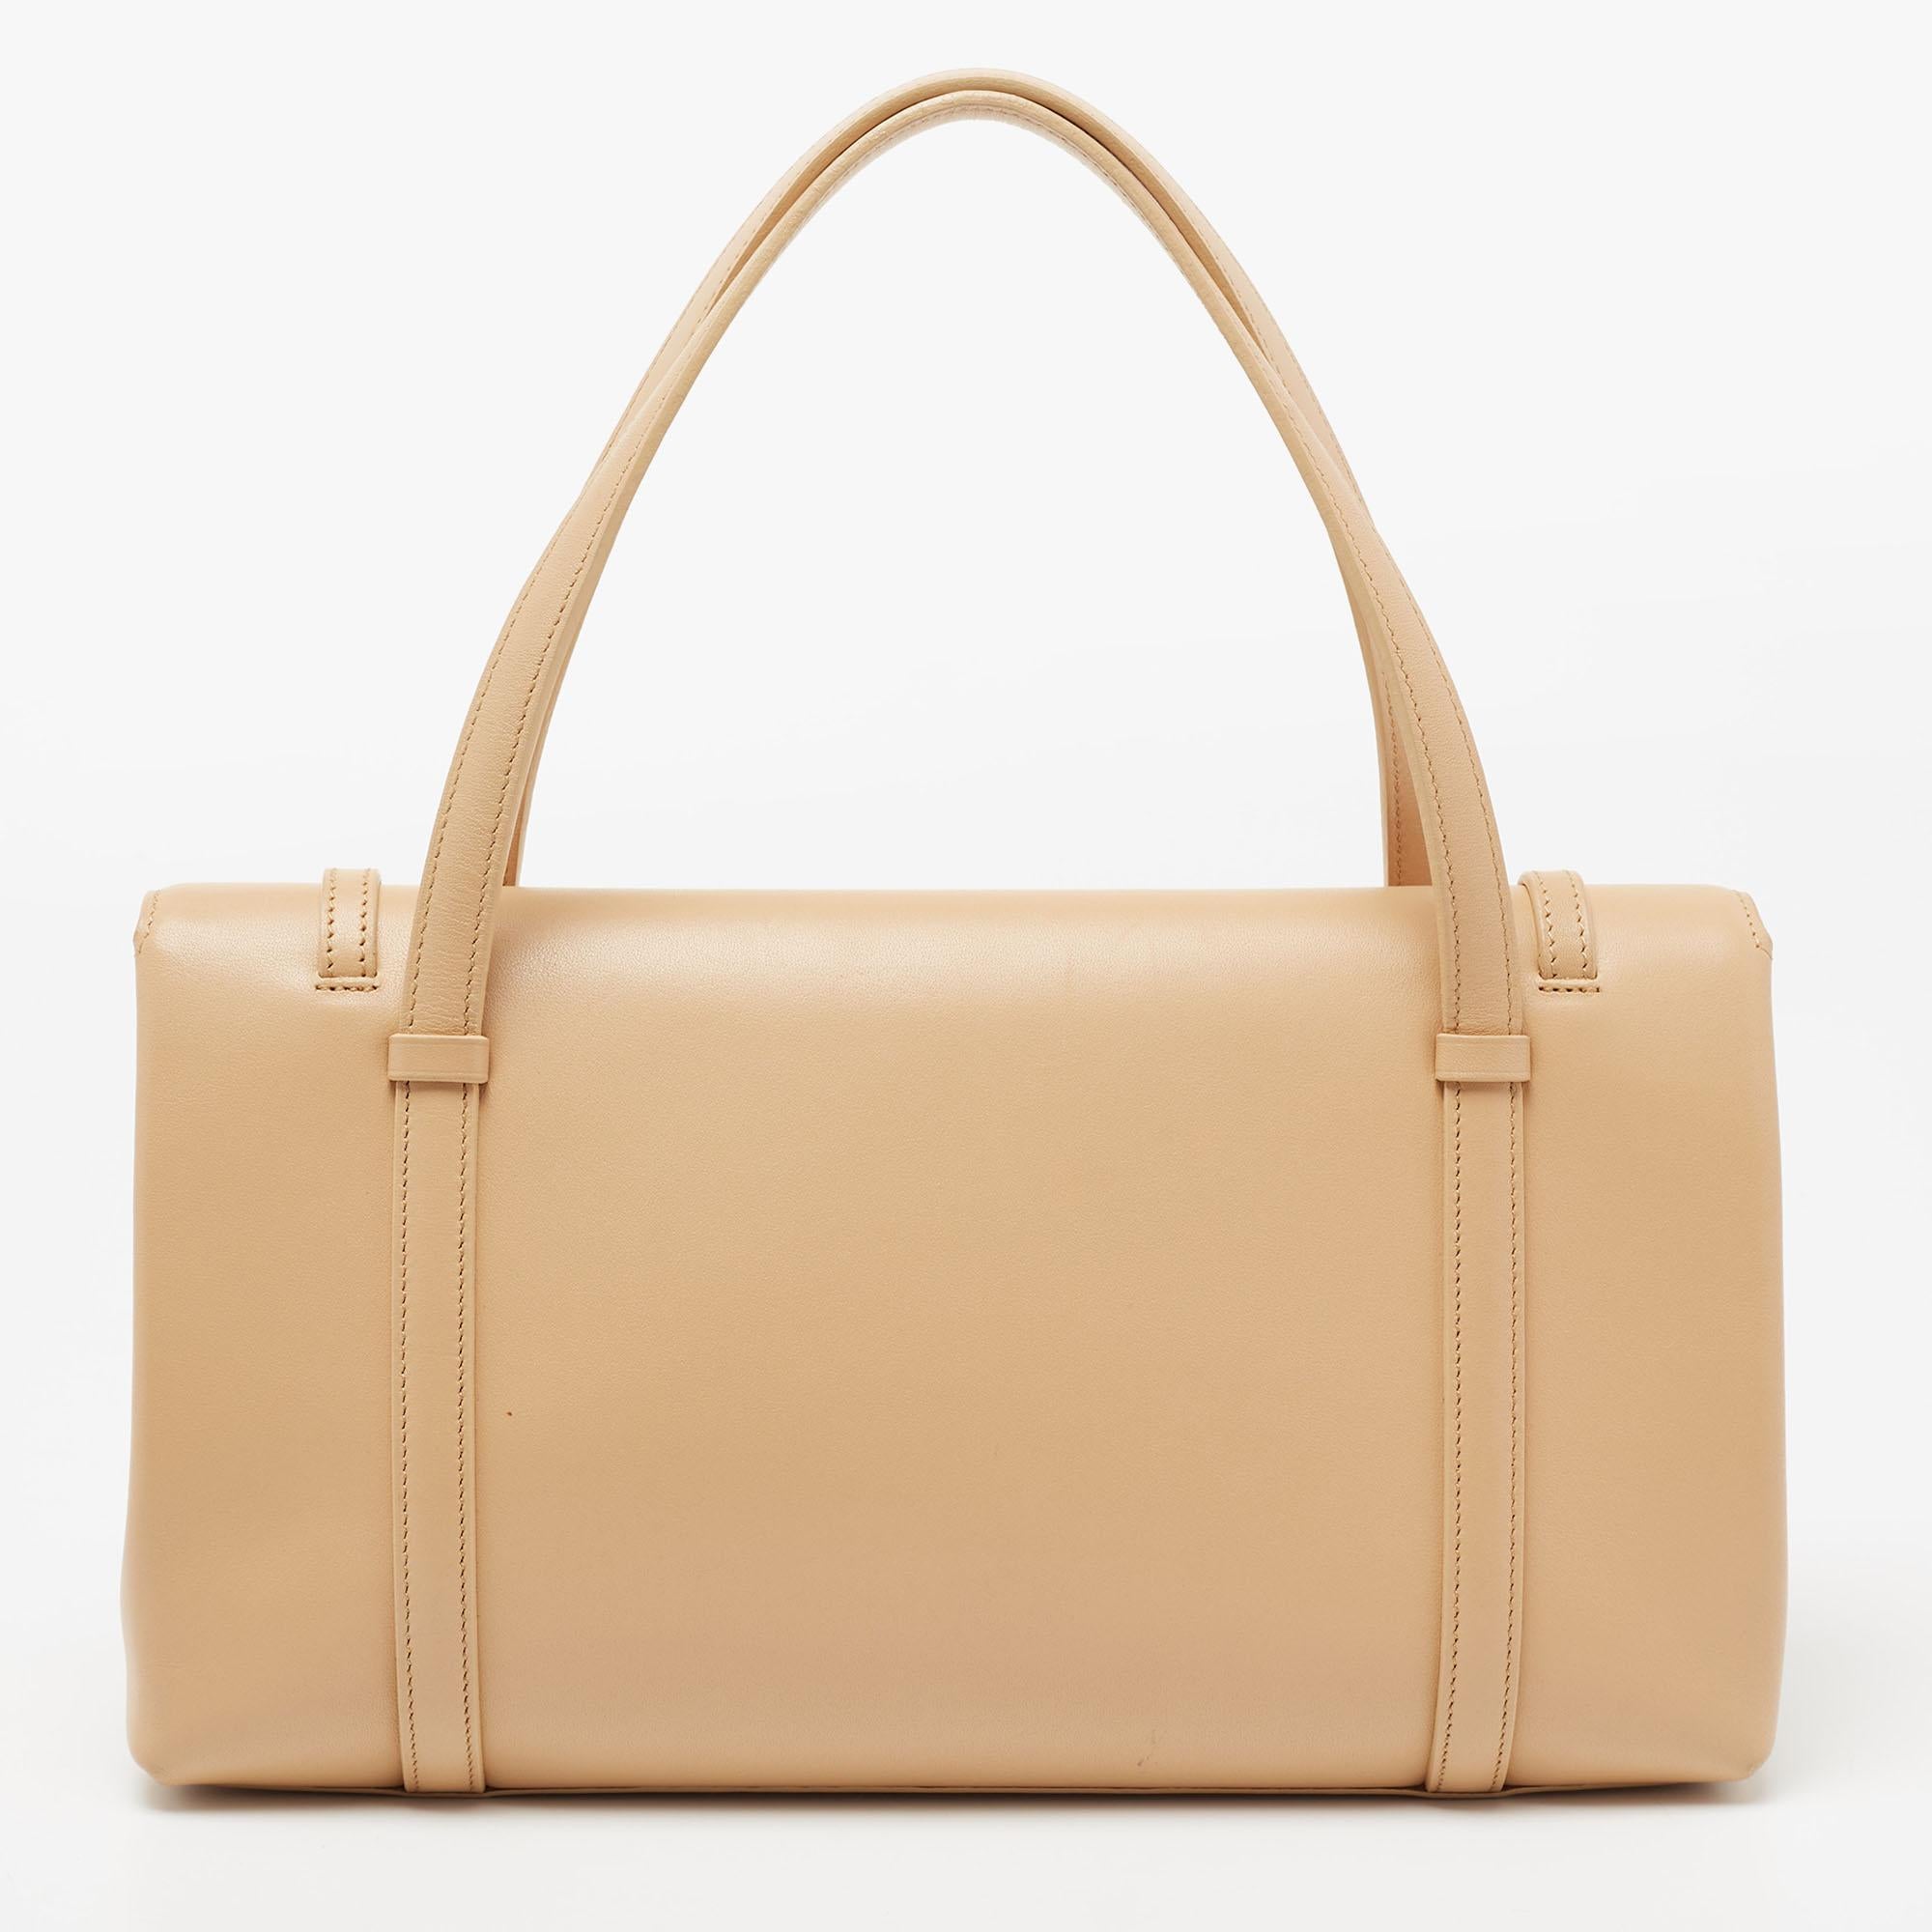 This Cartier bag is a timeless piece that can last you season after season. This bag is made of leather and sized to house all the things you need. It has a beige shade, logo detailing, two handles, and leather lining.

Includes: Original Dustbag,